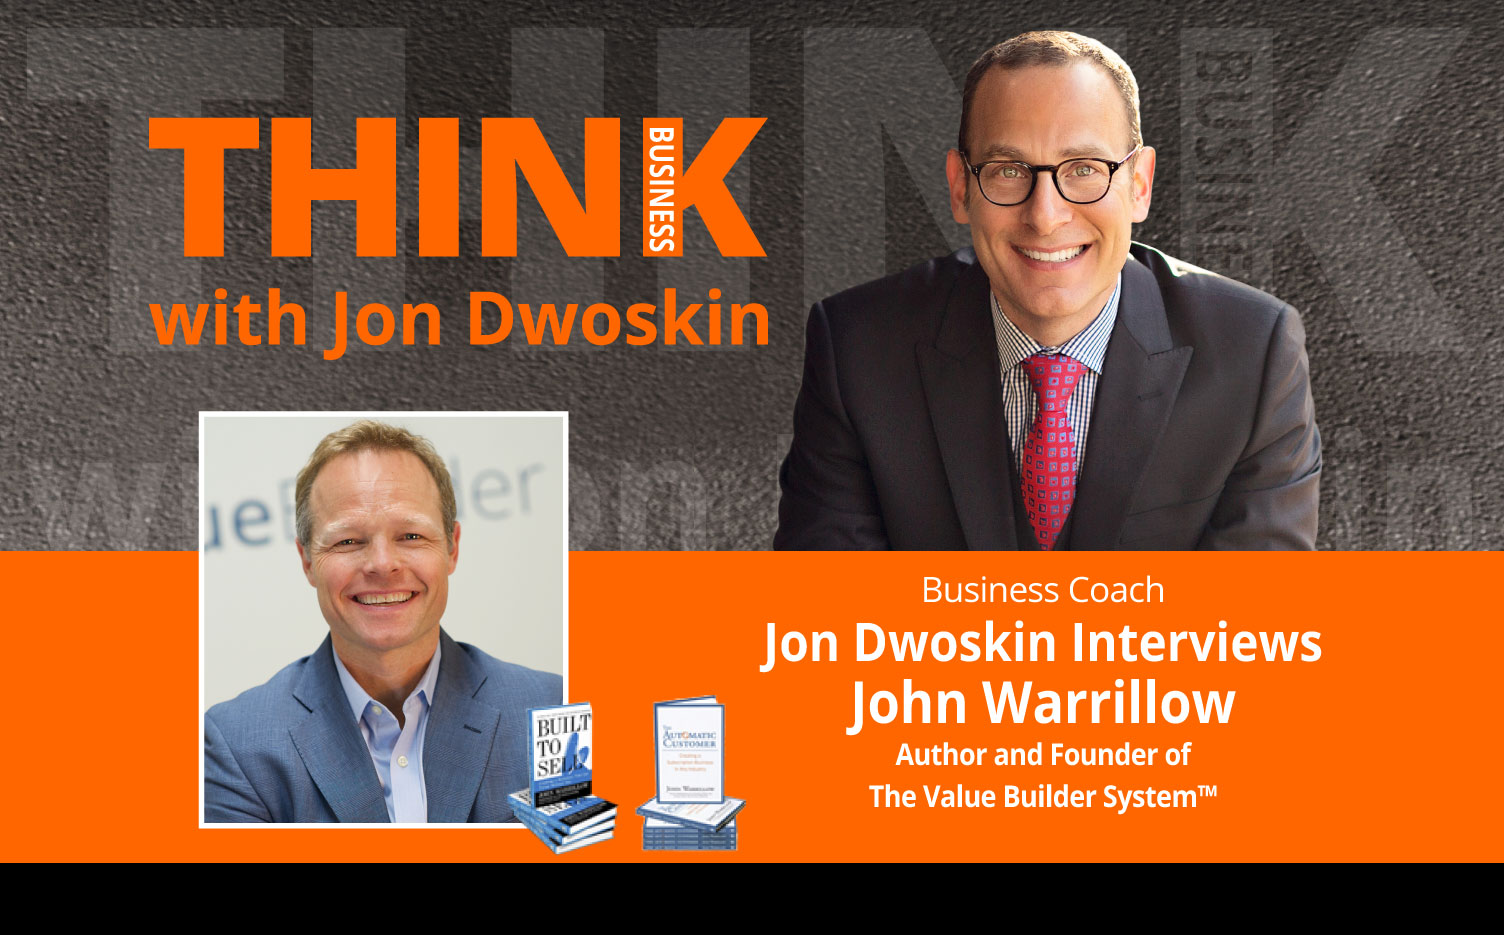 THINK Business Podcast: Jon Dwoskin Interviews John Warrillow, Author and Founder of The Value Builder System™